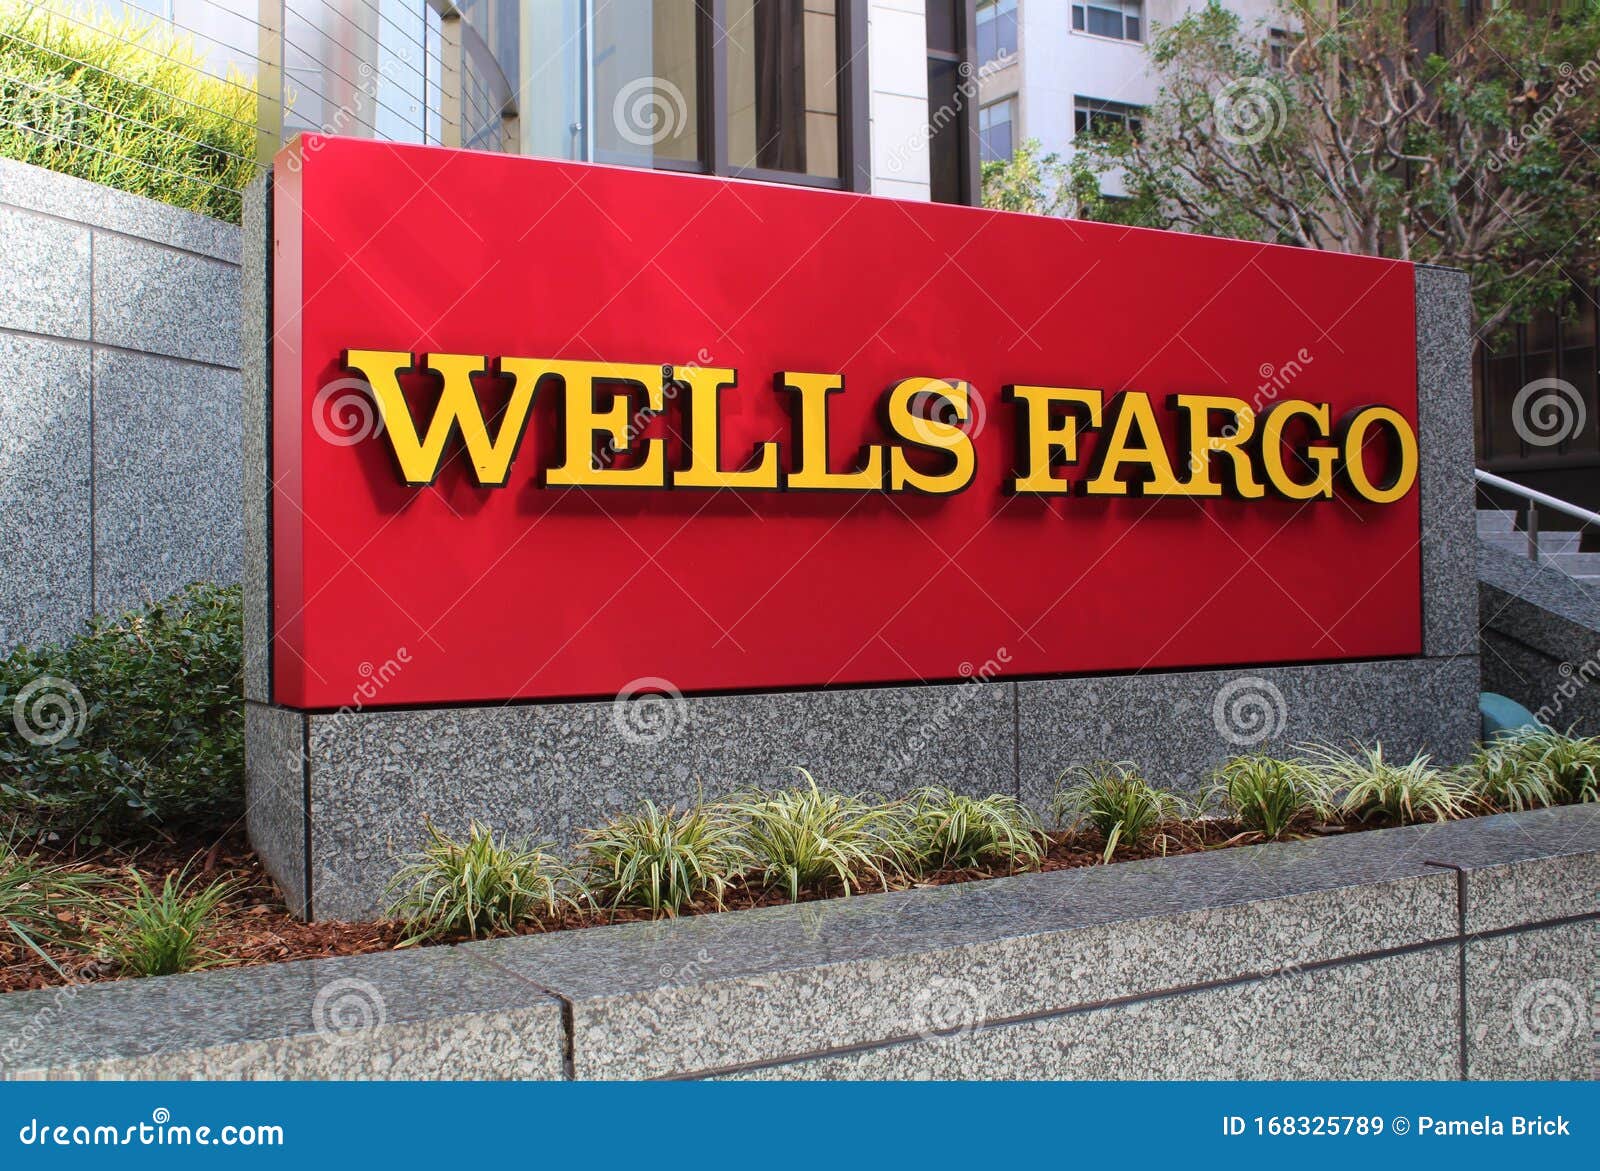 wells fargo sign in mobile banking